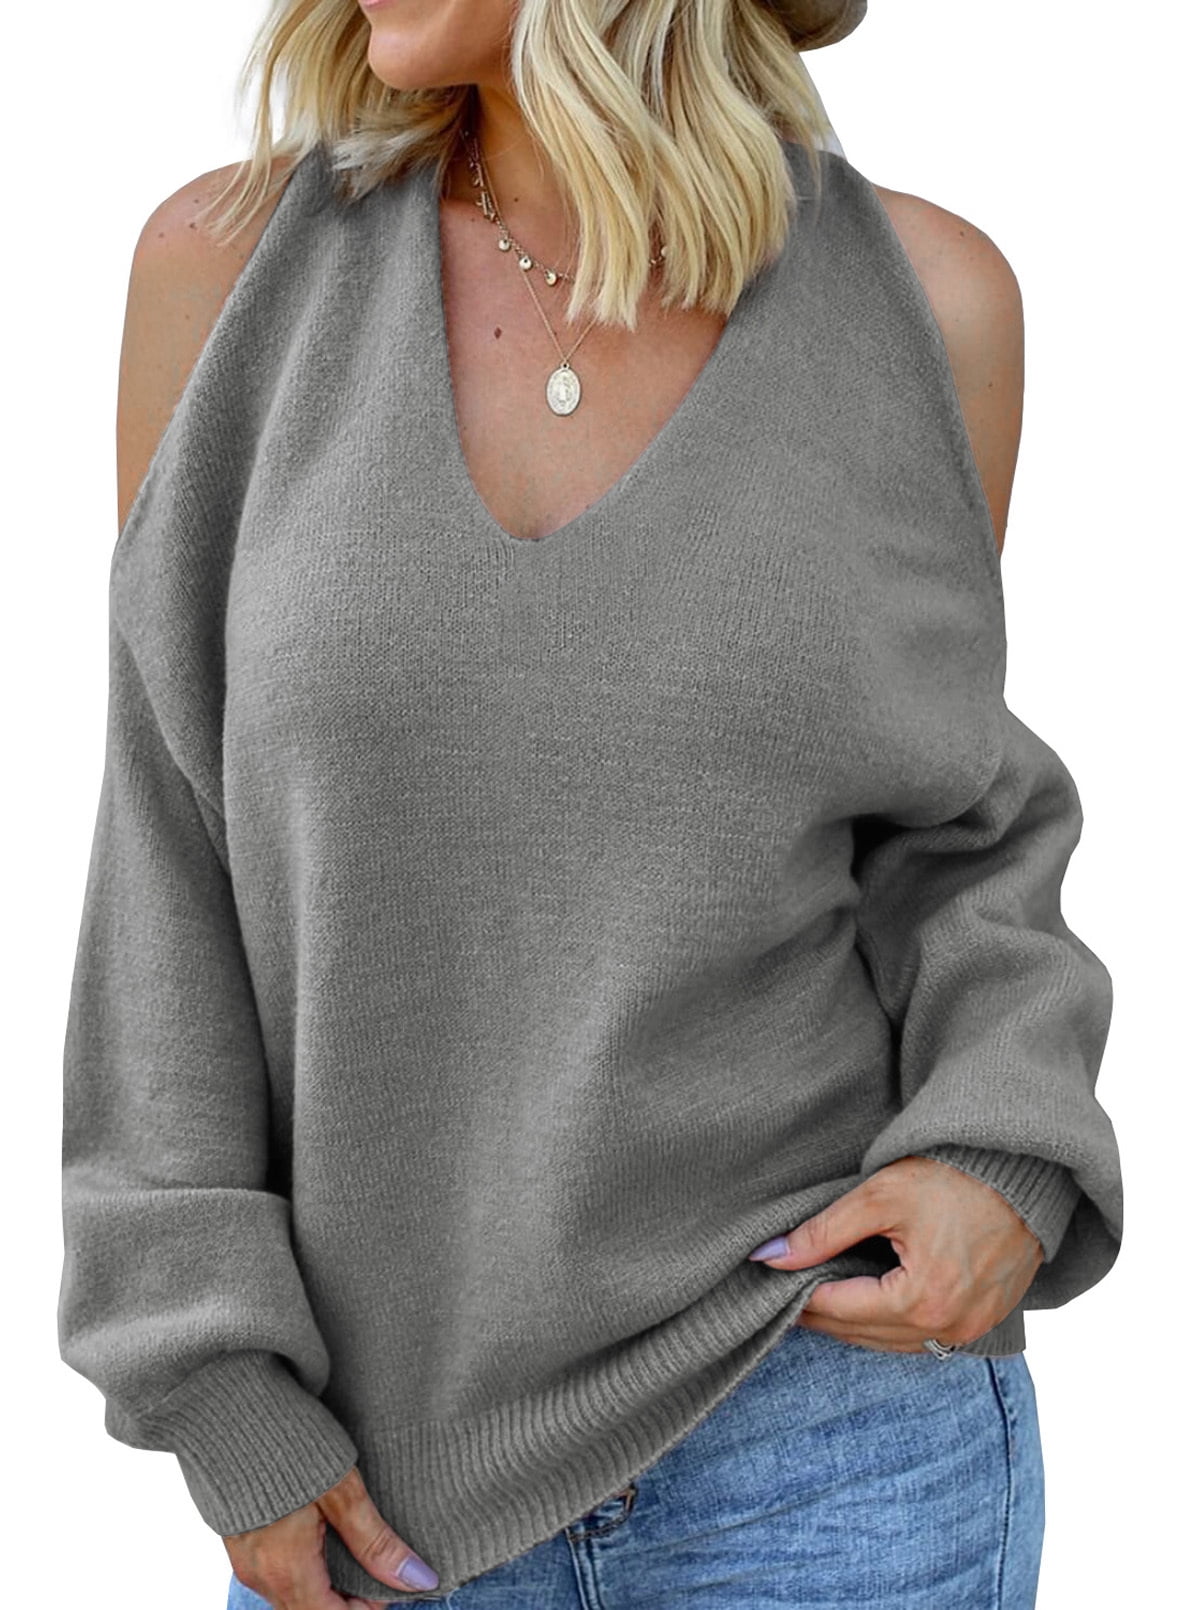 Aleumdr Women Off The Shoulder Long Sleeve Comfy Warm Pullover Sweater Tops 